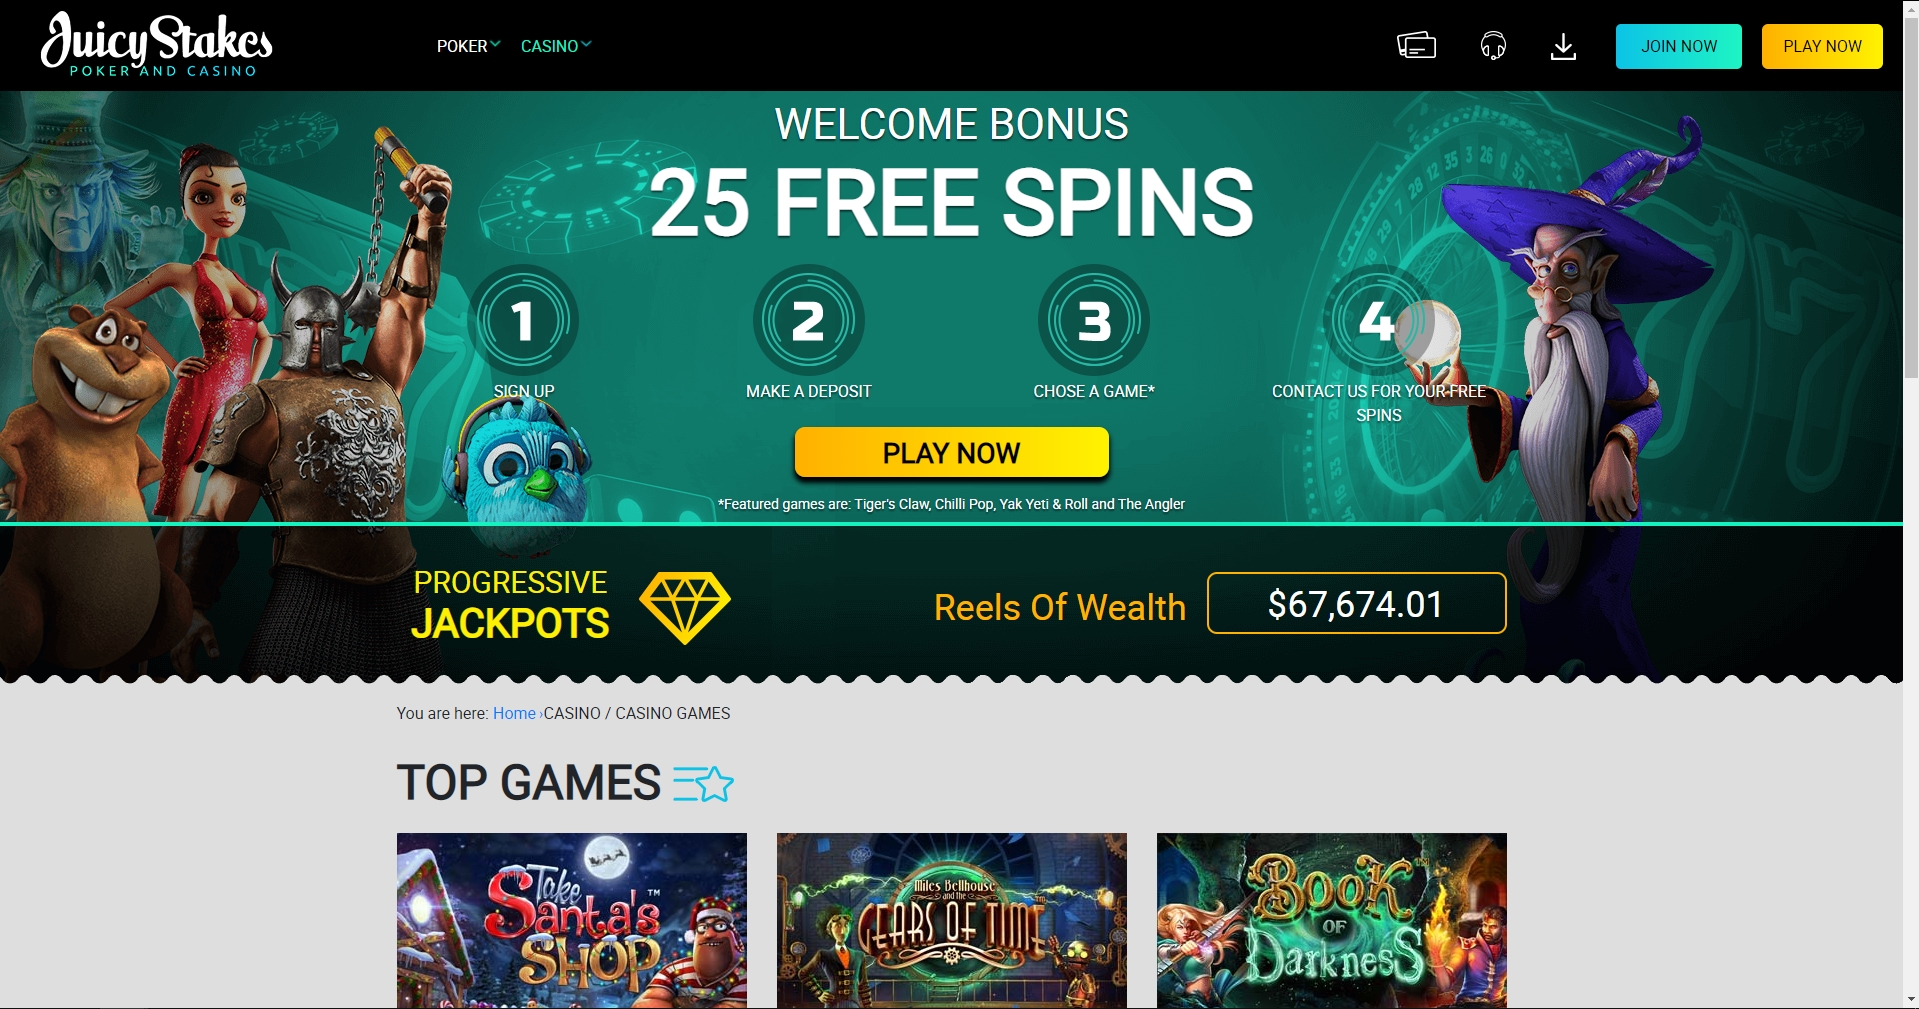 Juicy Stakes Casino Games